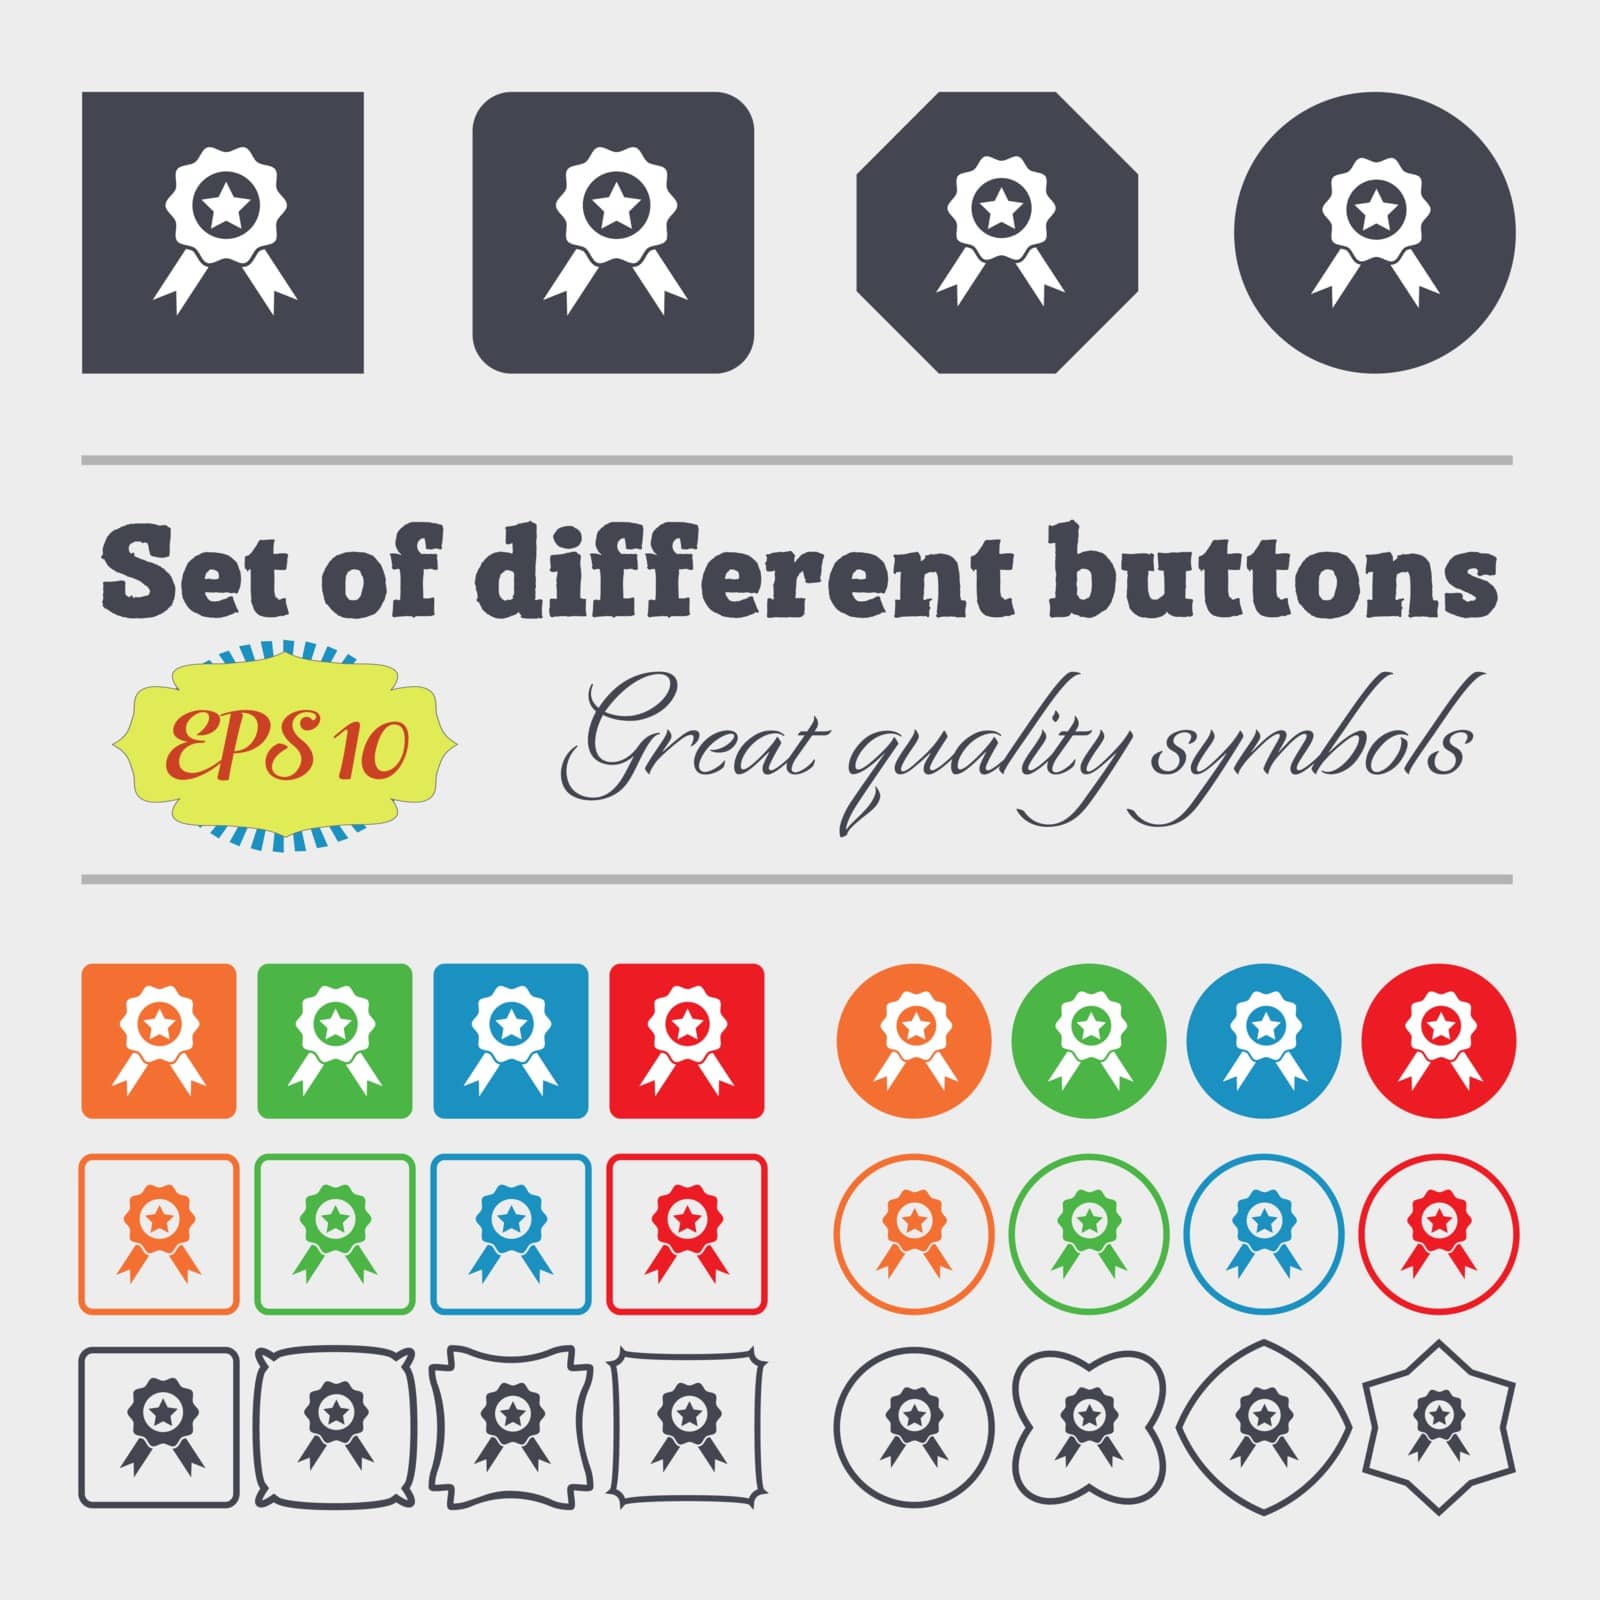 Award, Medal of Honor icon sign. Big set of colorful, diverse, high-quality buttons. Vector illustration